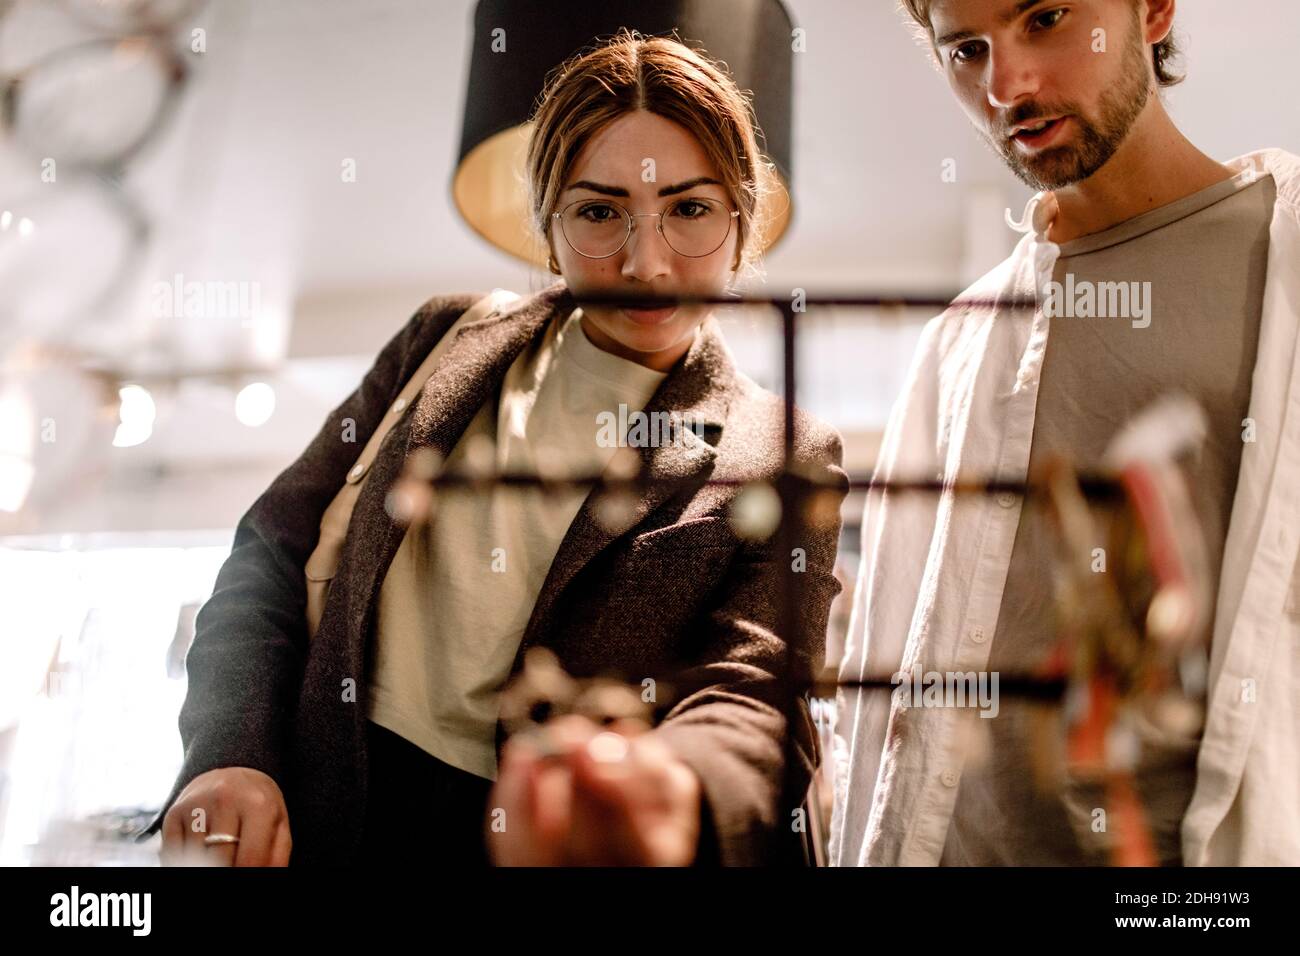 Man and woman looking at eyewear in retail store Stock Photo